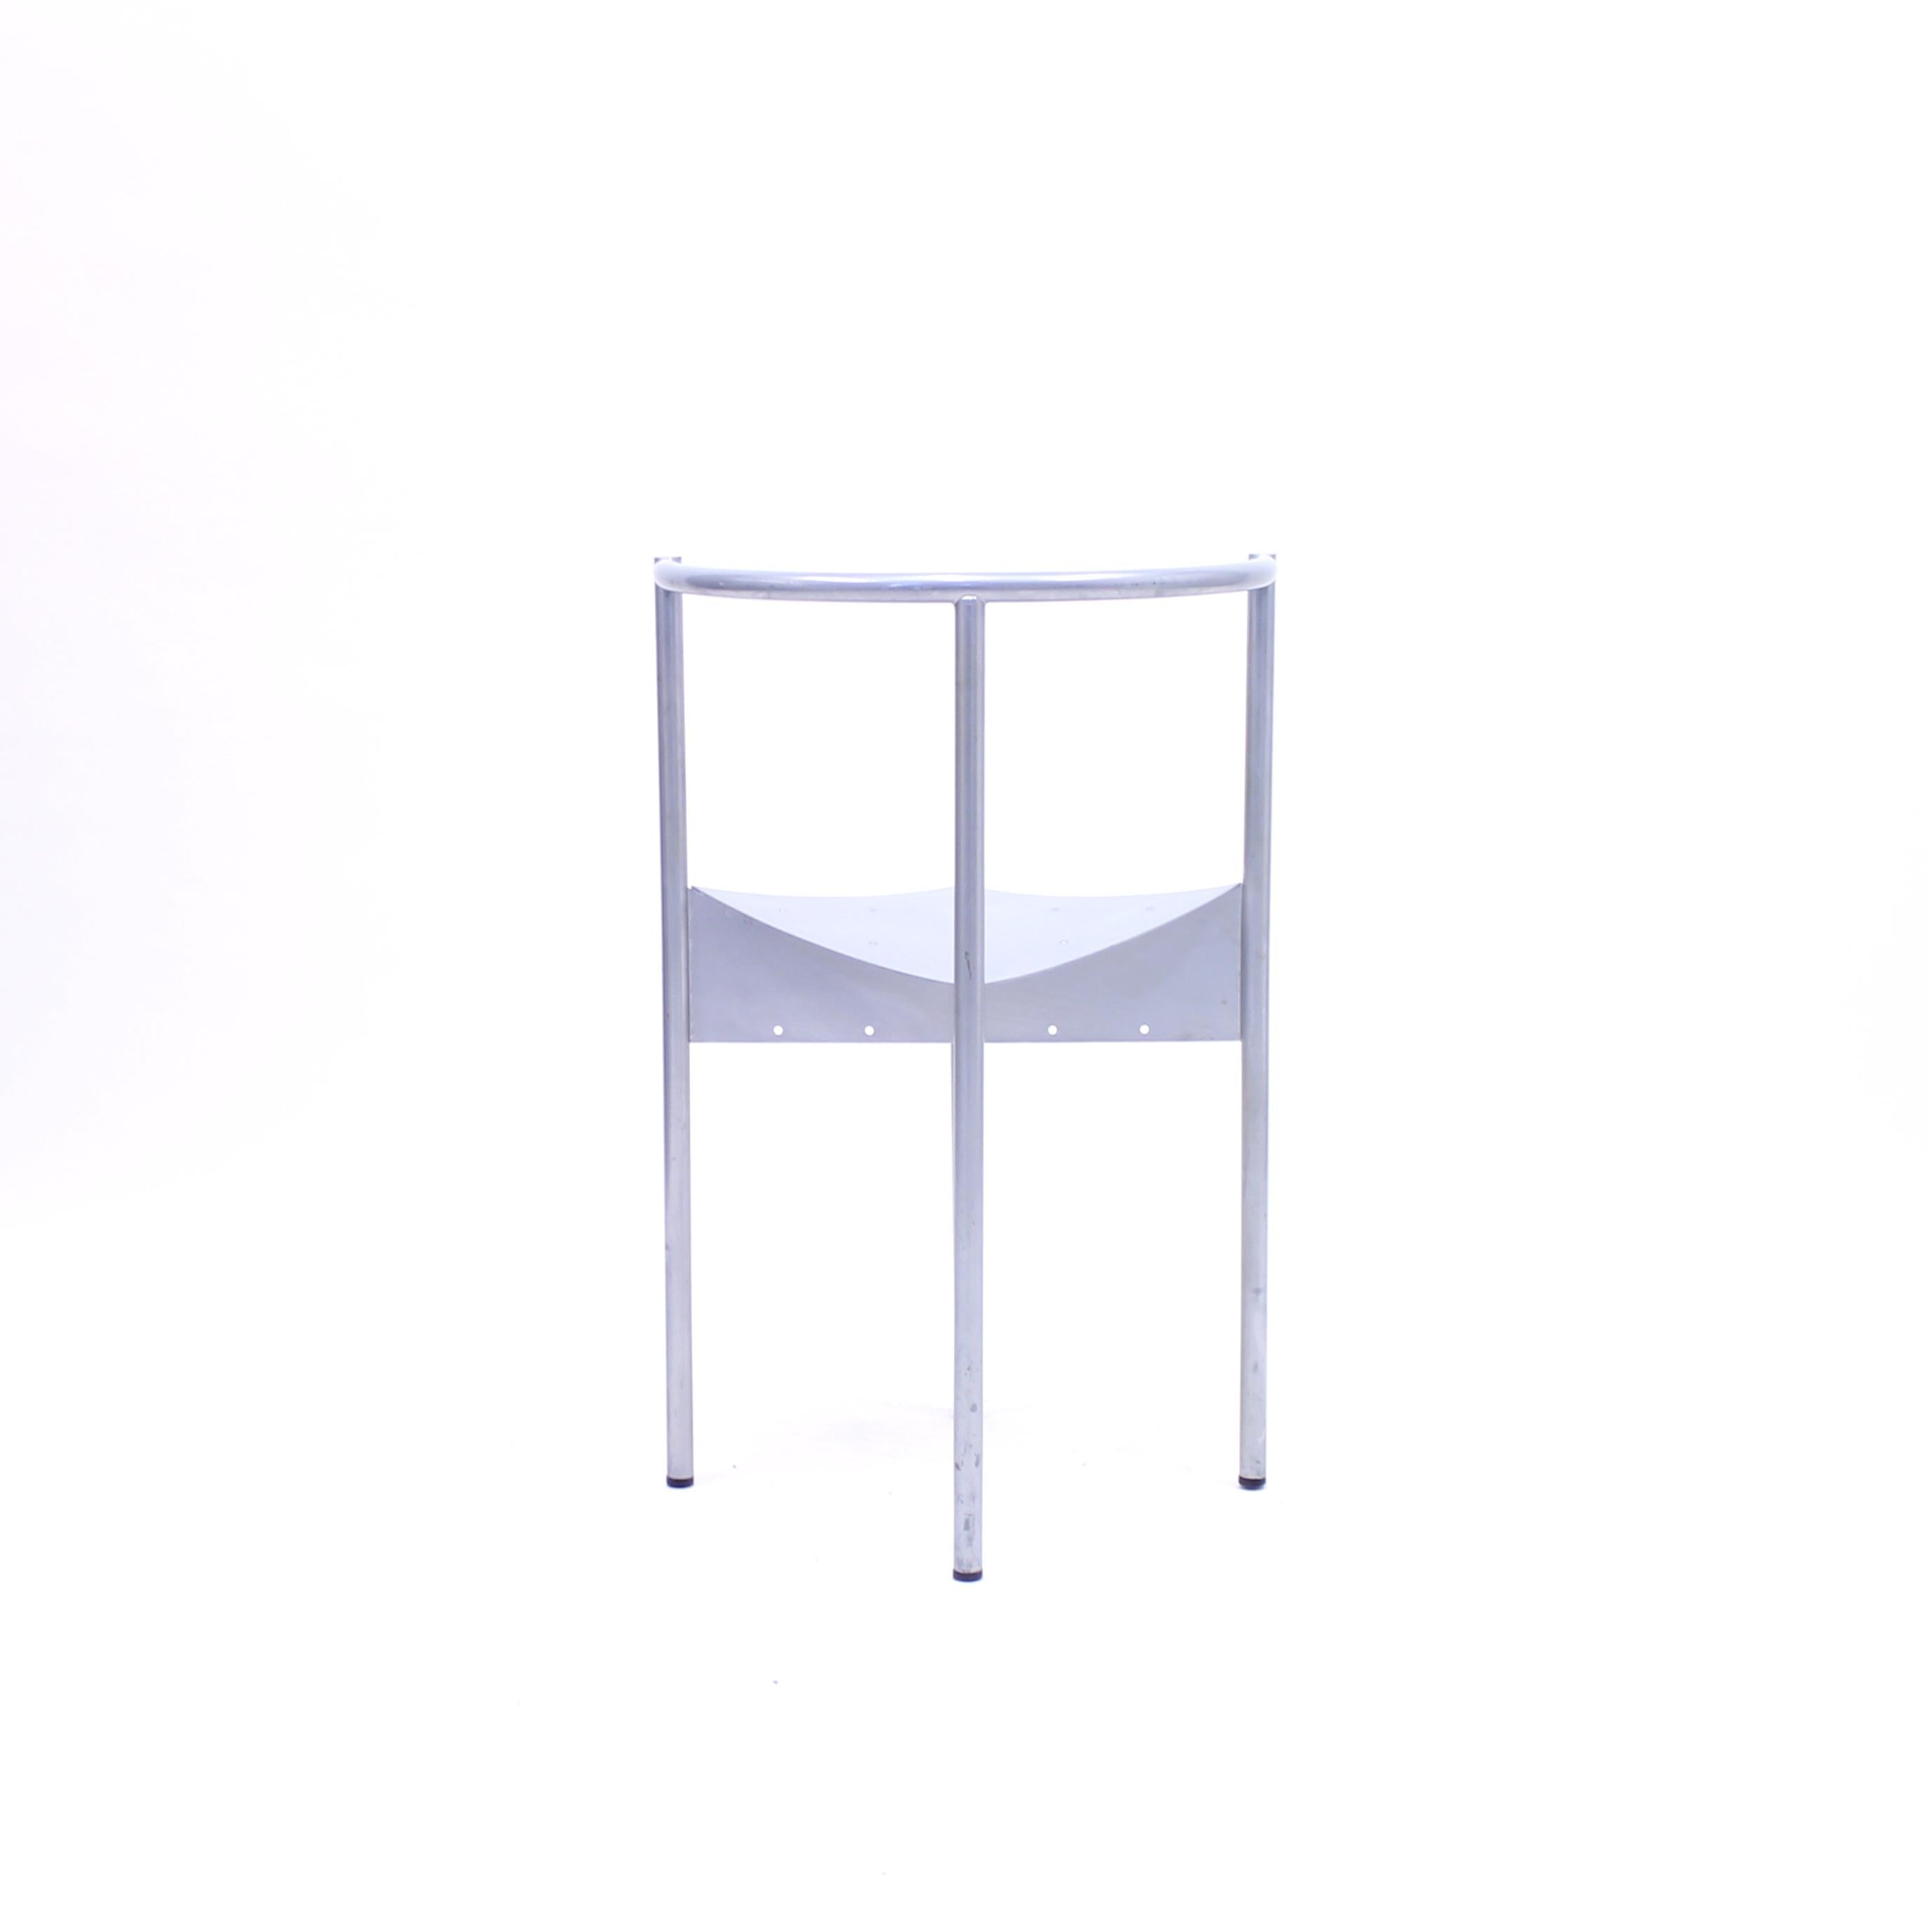 Philippe Starck, Wendy Wright Chair, Disform, 1986 6